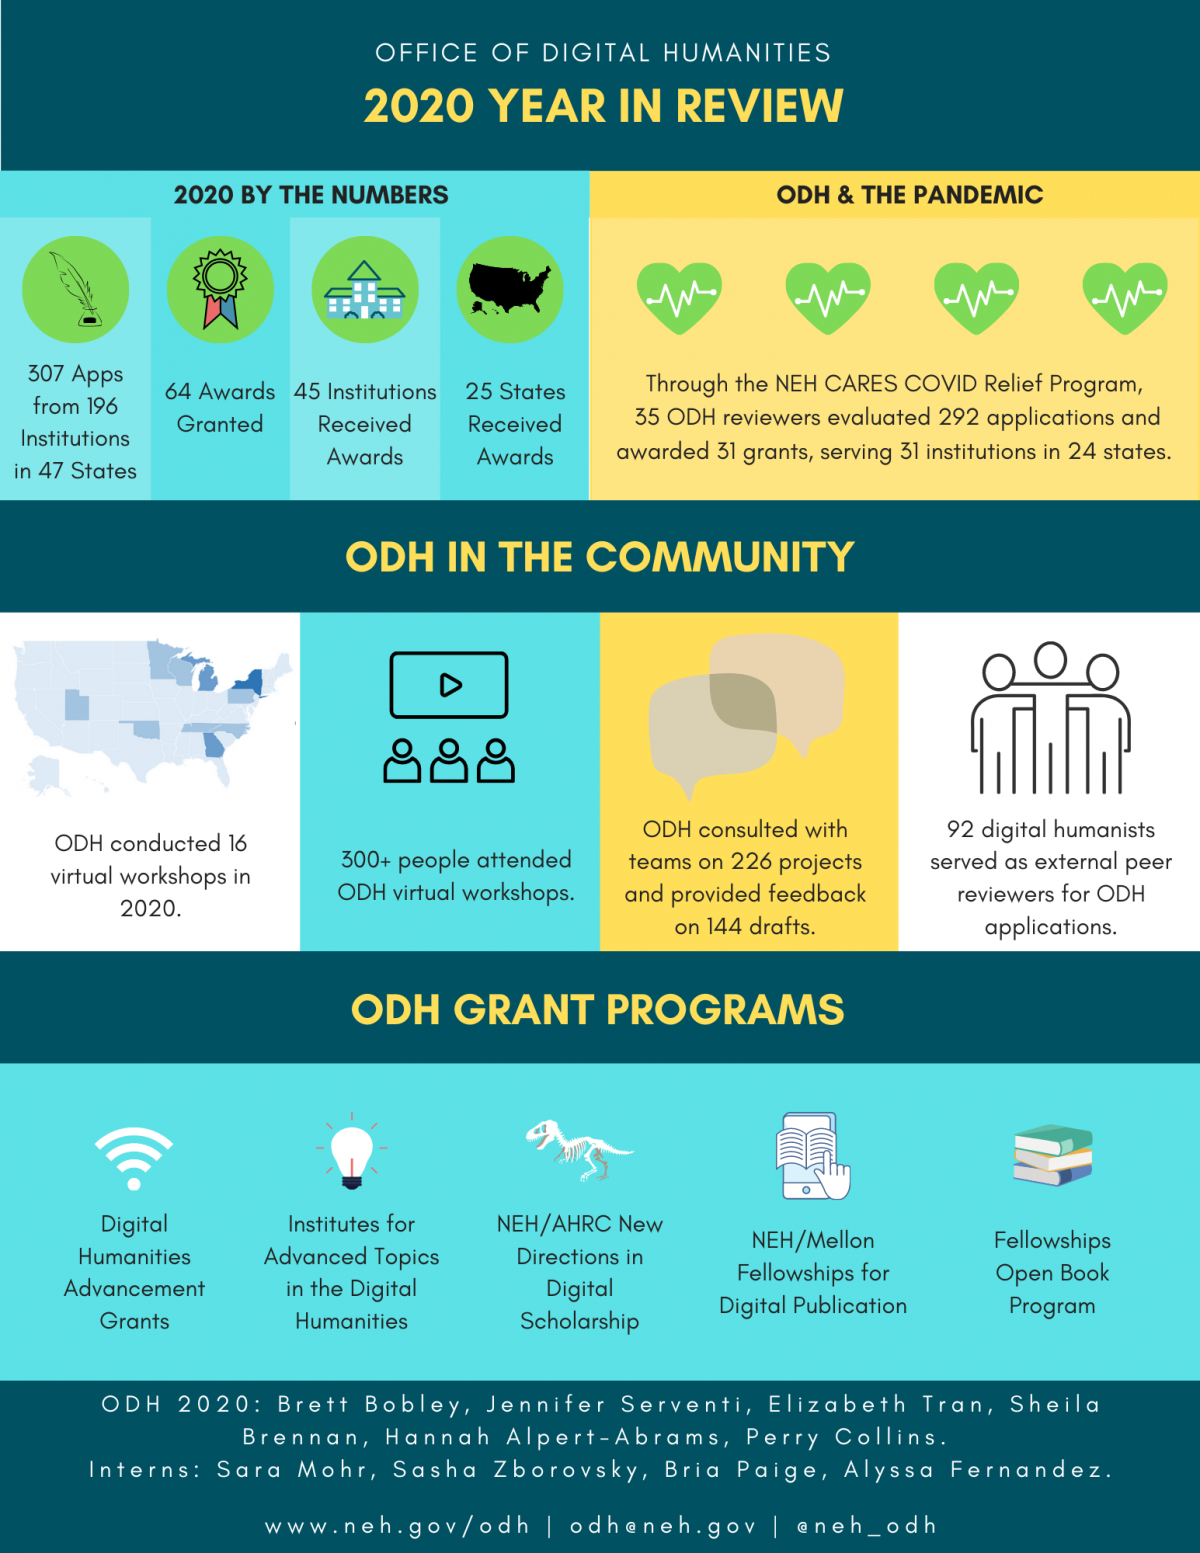 Infographic showing a summary of ODH’s grant programs, including applications reviewed, awards made, outreach, and grant programs.